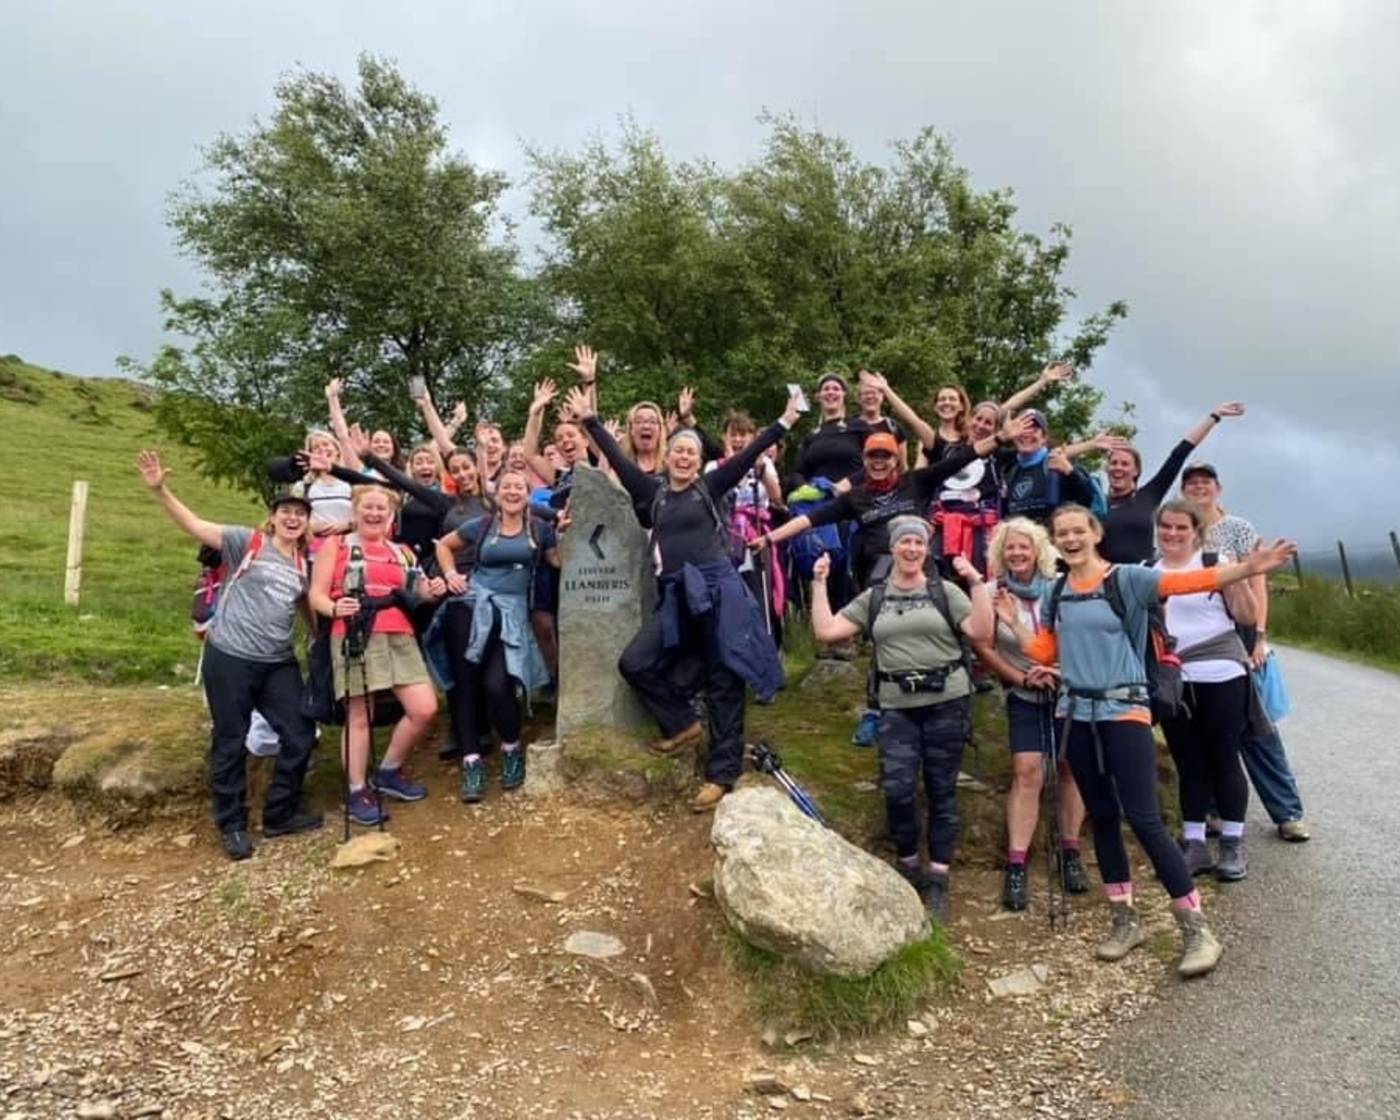 Cycle and stride group solemother with their arms up on a walk